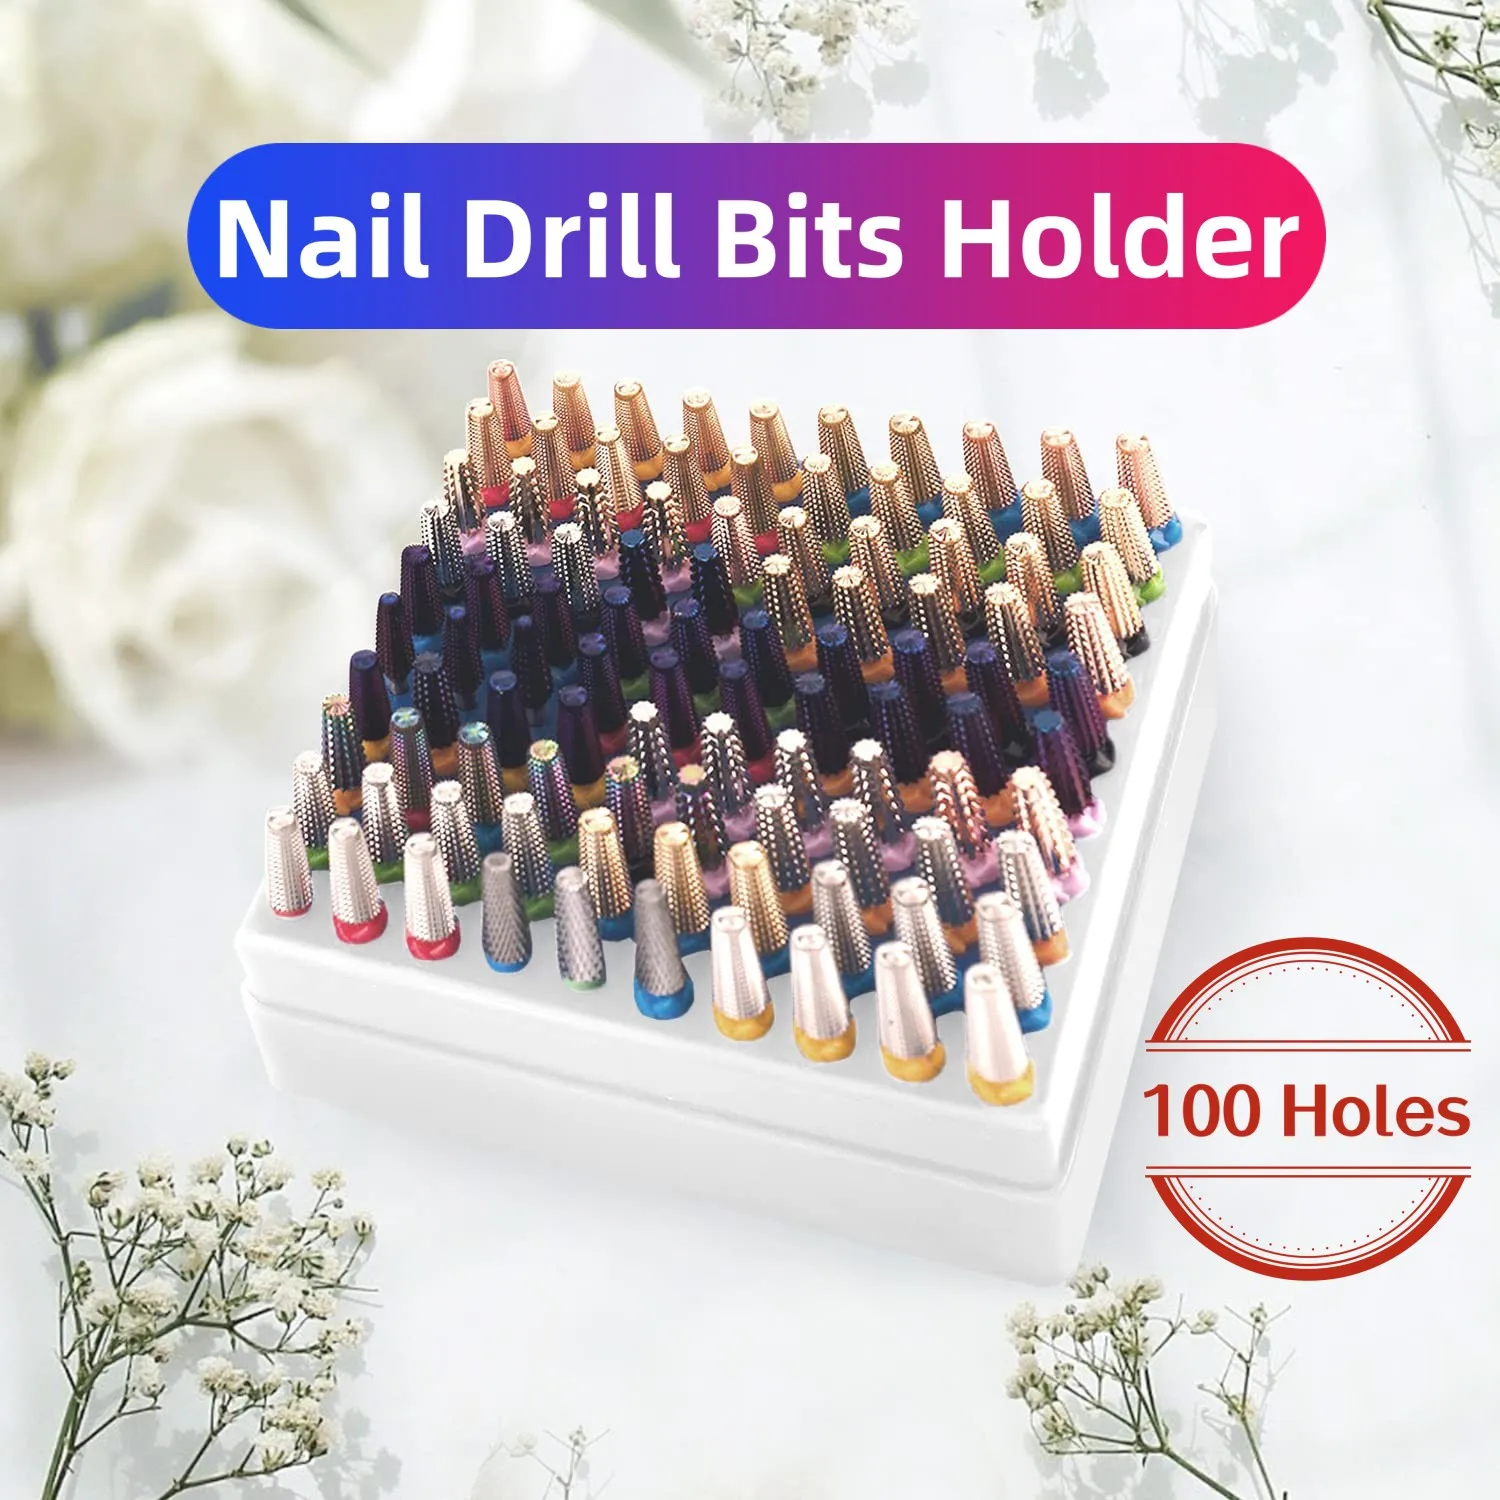 

Nail Drill Bit Holder Efile Nail Bits Displayer Organizer Container Dustproof Portable Organizer Storage Box for 100 Holes